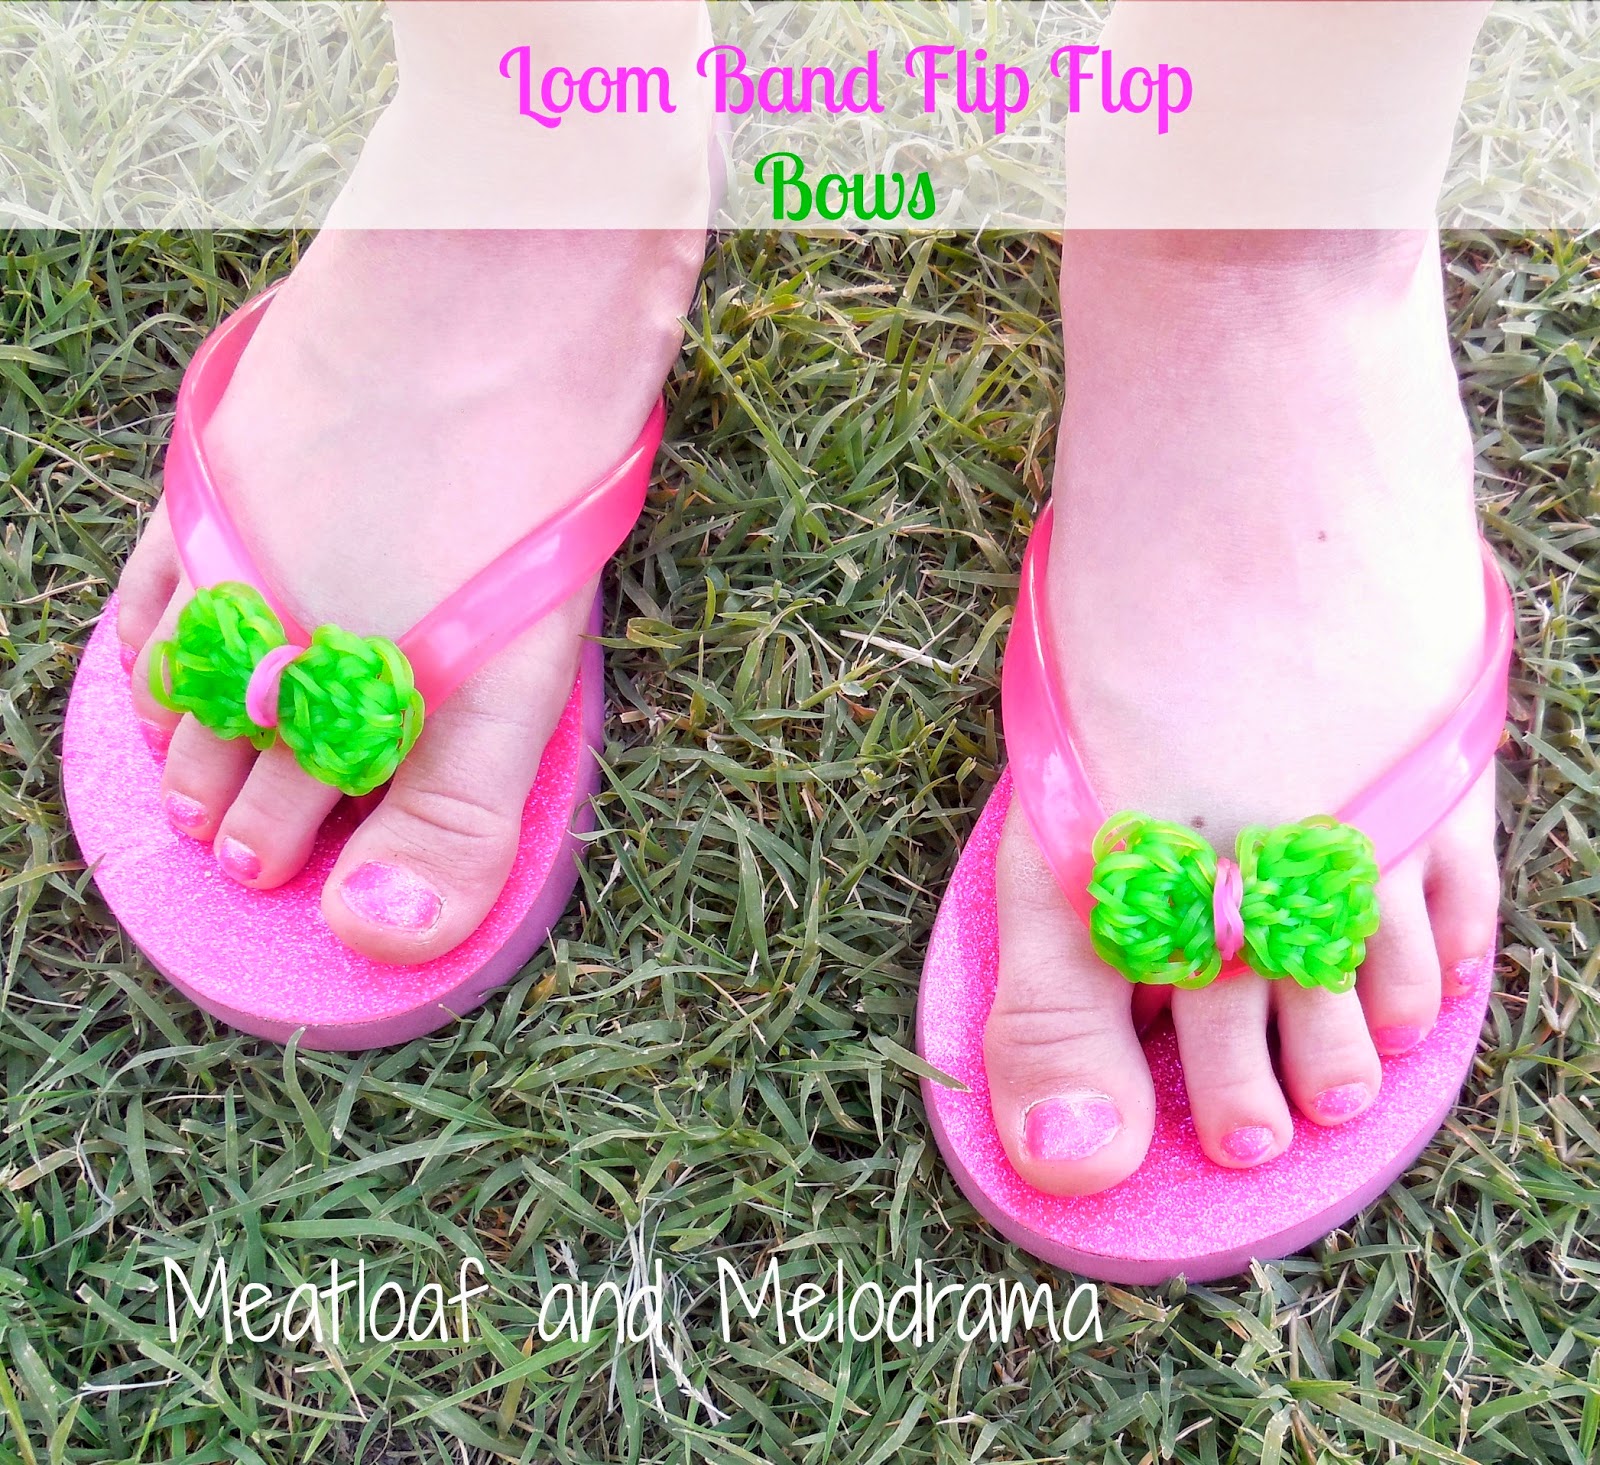 bows made from green and pink Rainbow Loom bands on flip flops